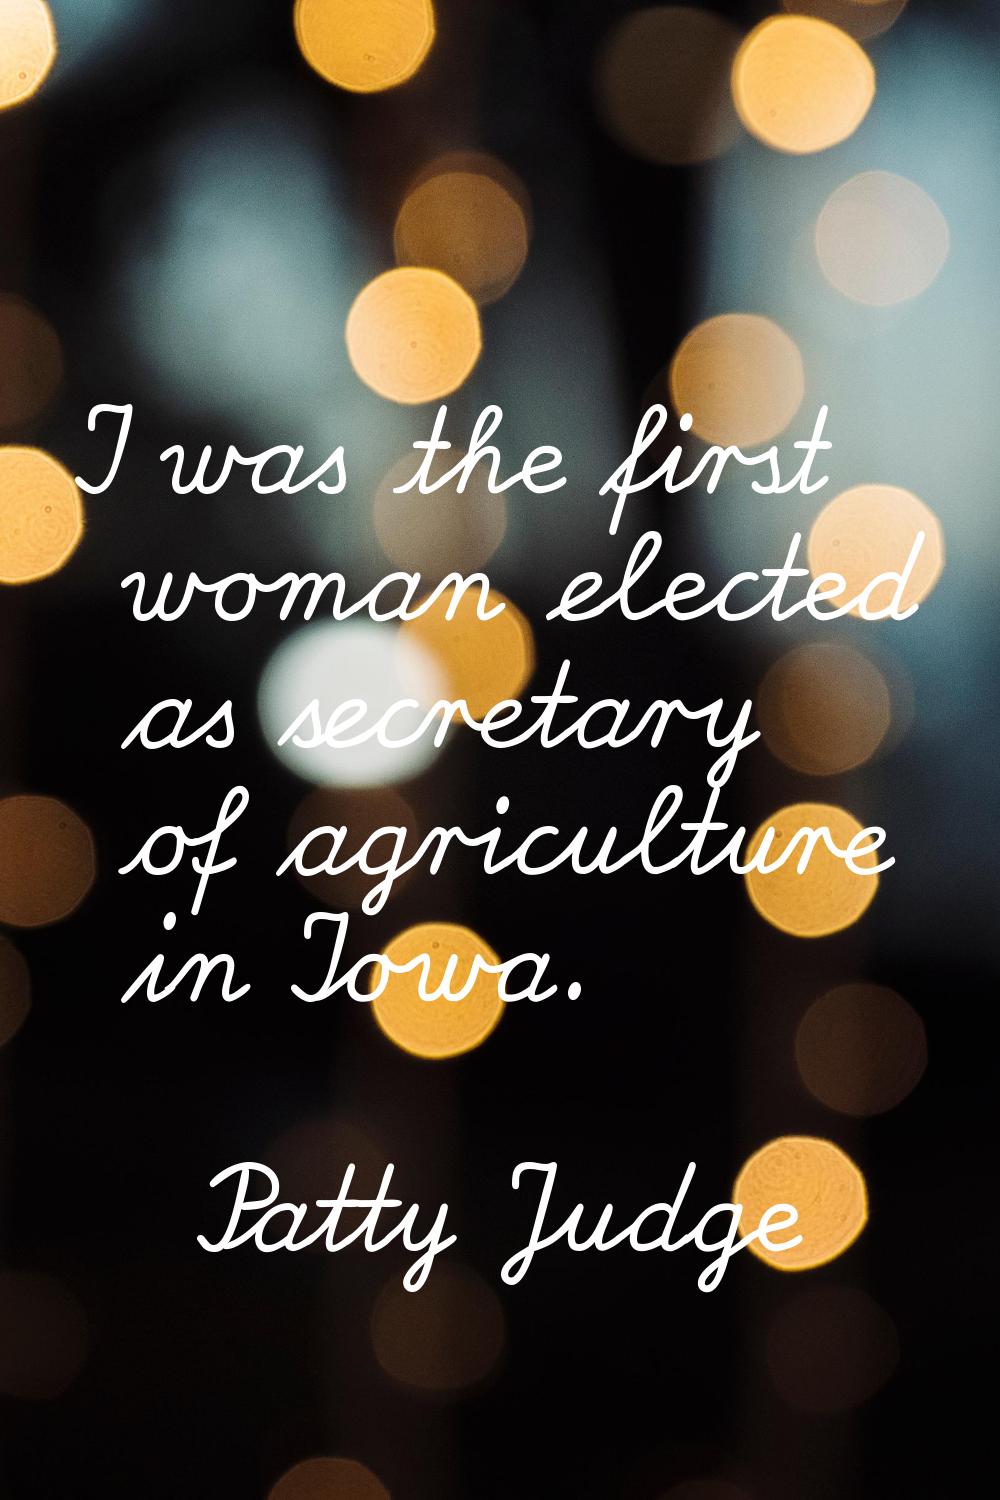 I was the first woman elected as secretary of agriculture in Iowa.